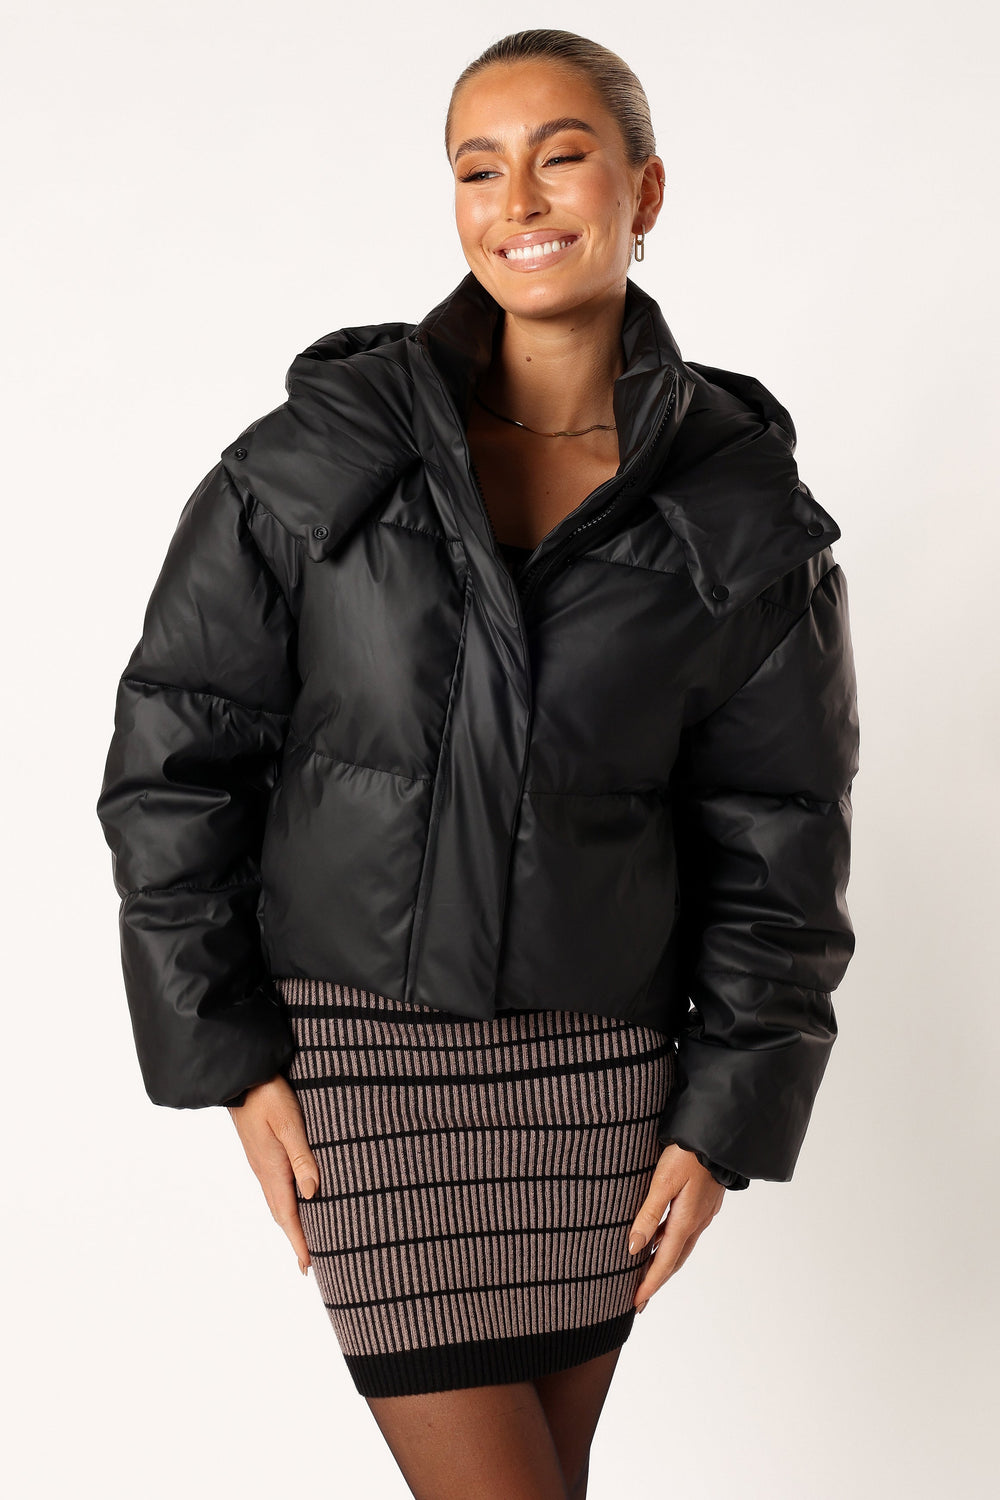 Petal and Pup USA OUTERWEAR Tania Puffer Jacket - Black